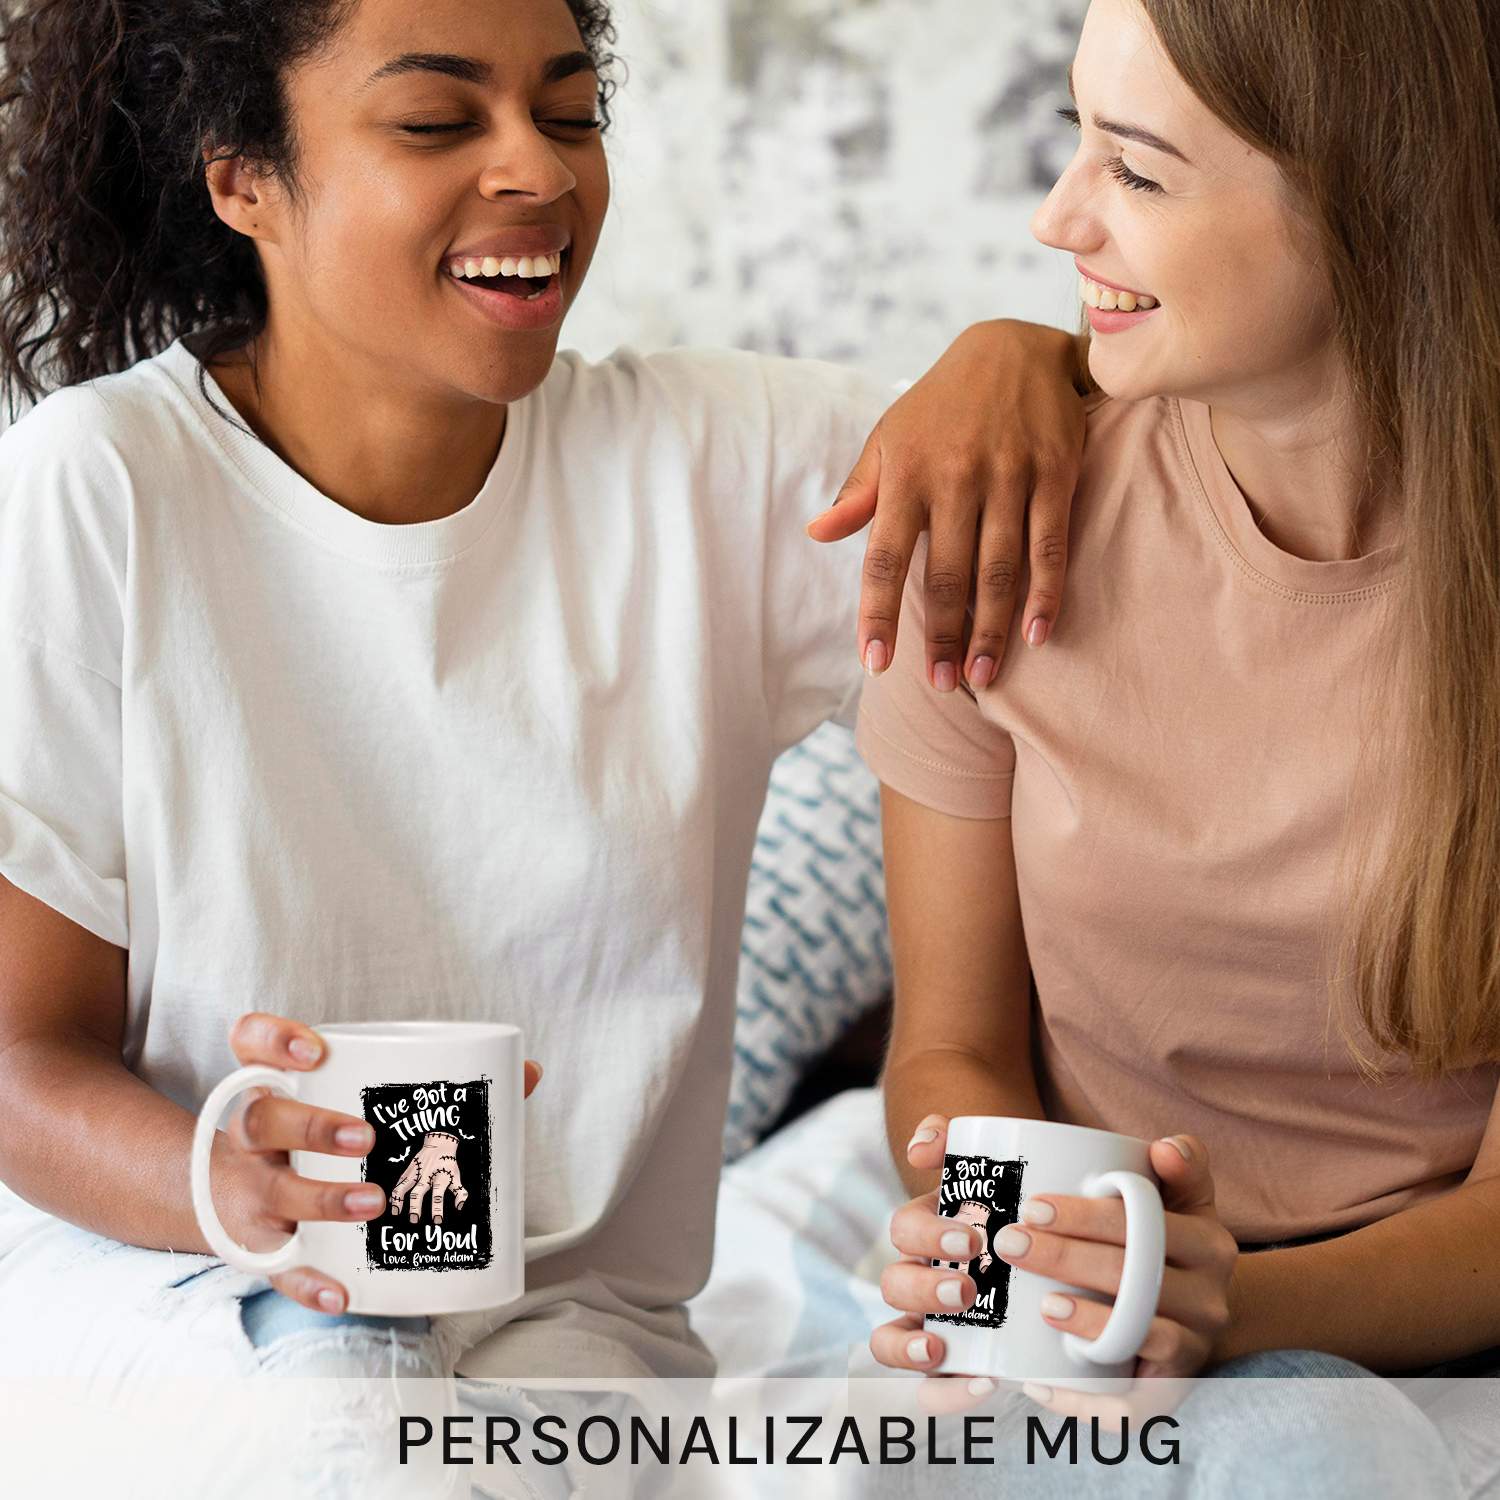 I've Got A Thing For You - Personalized Anniversary or Halloween gift for Boyfriend or Girlfriend - Custom Mug - MyMindfulGifts